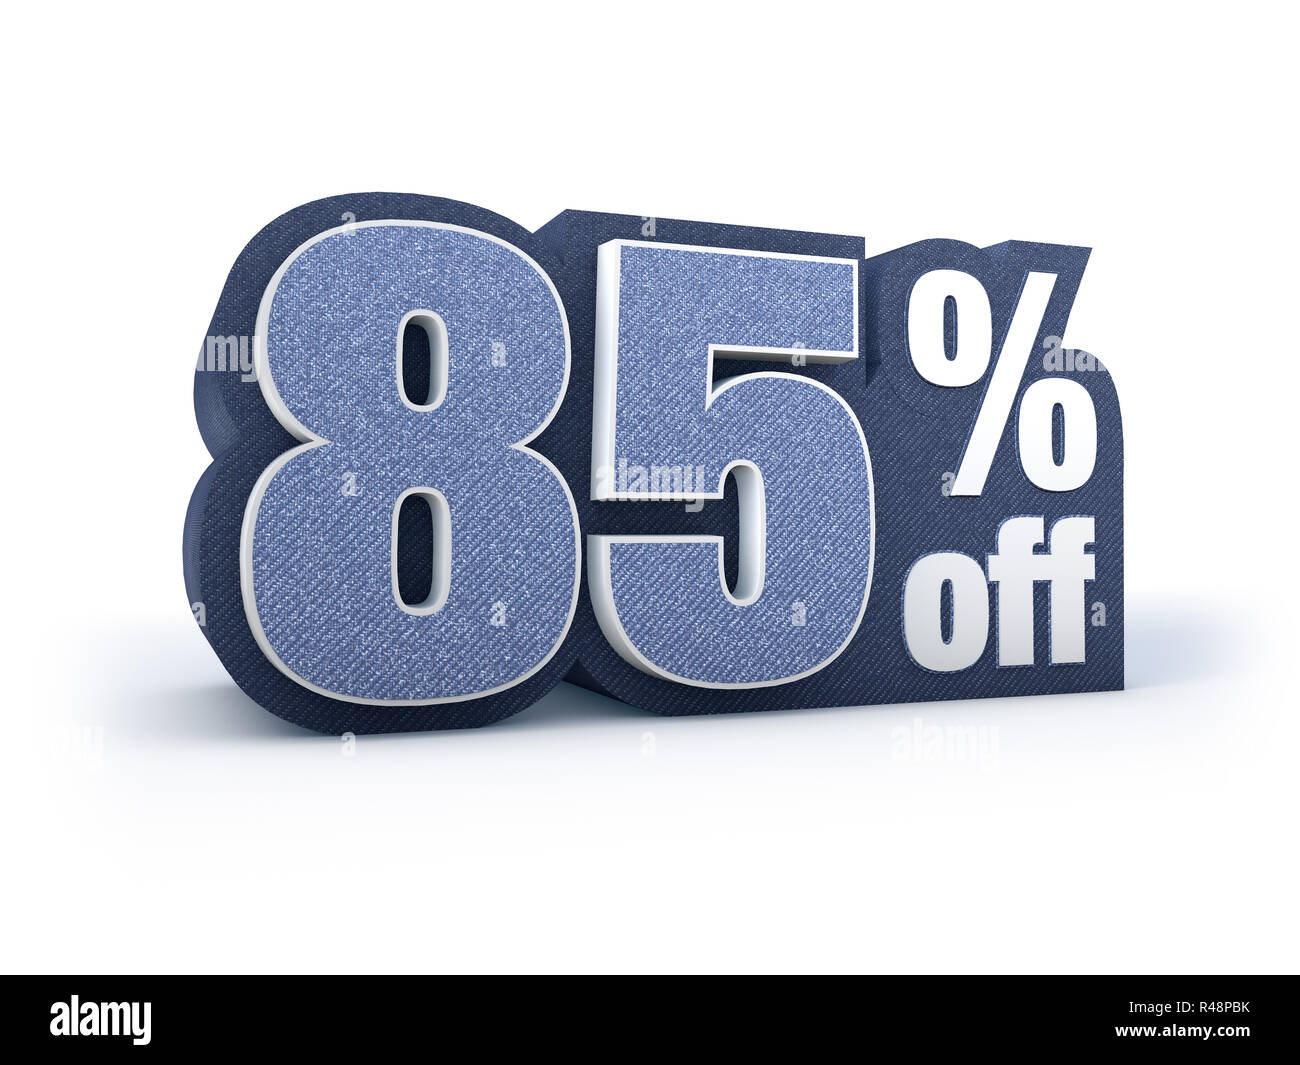 85 percent off denim styled discount price sign Stock Photo